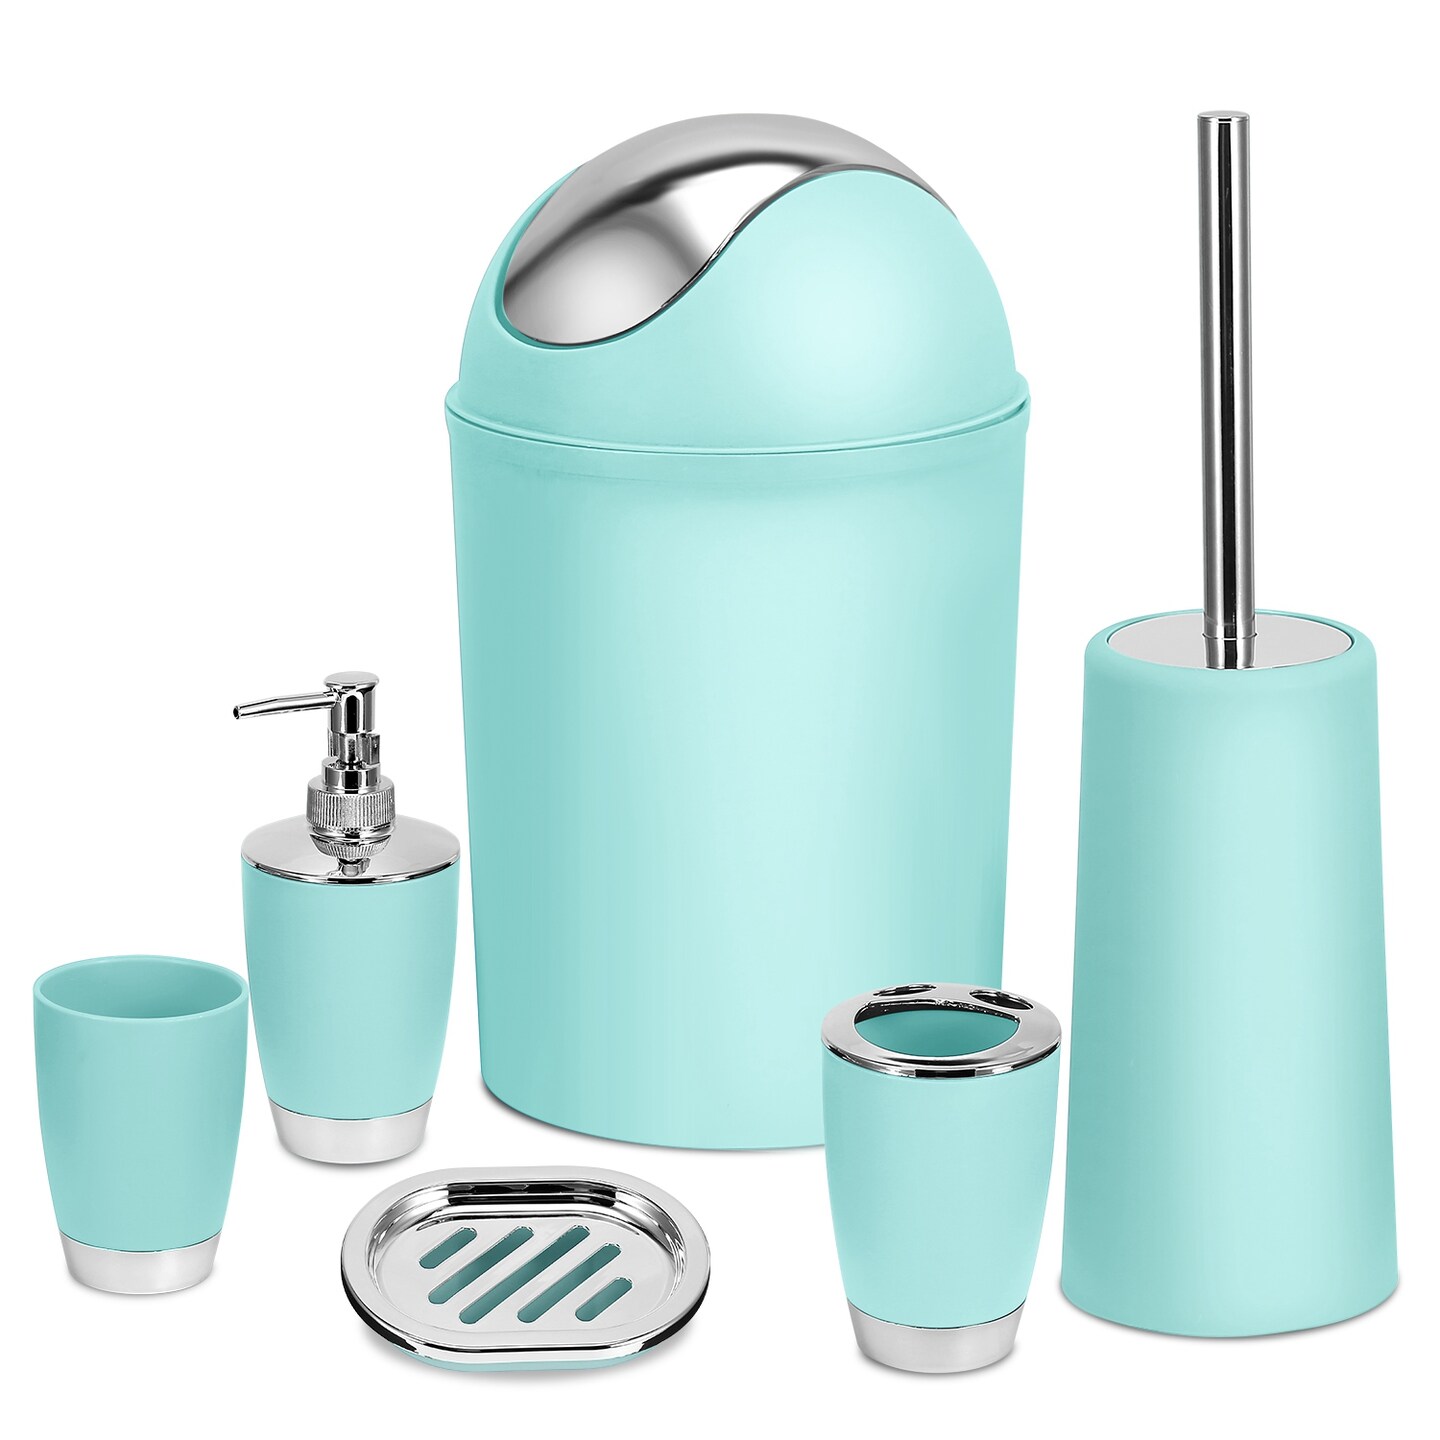 Eggracks 6 Pcs Bathroom Accessories Set including Soap Dispenser | Toothbrush Holder | Tumbler | Soap Dish | Toilet Cleaning Brush and Trash Can